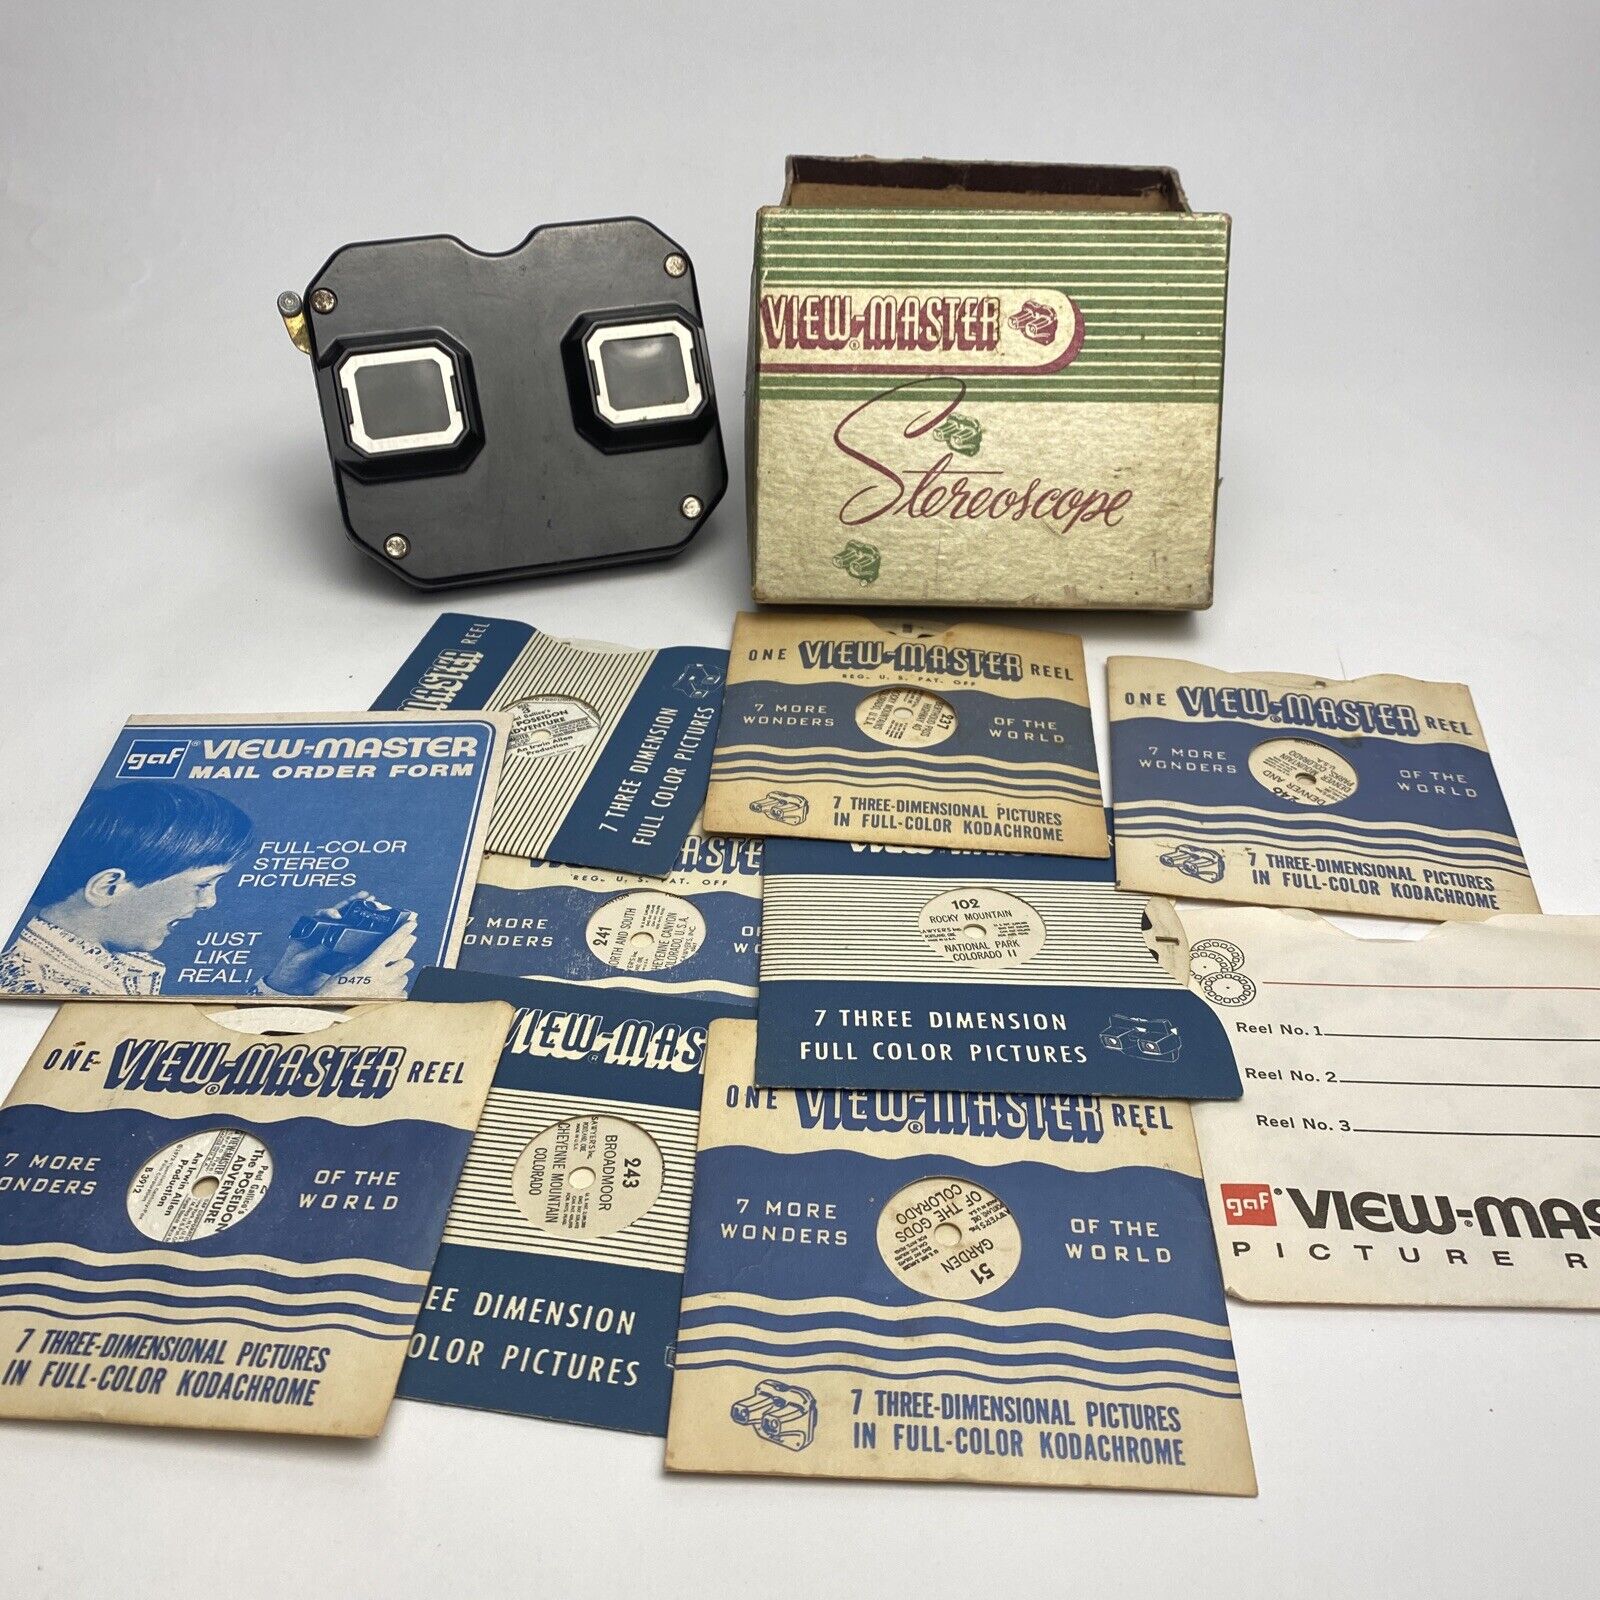 Vintage 1950\'s Sawyer’s View Master Stereoscope In Original Box                 